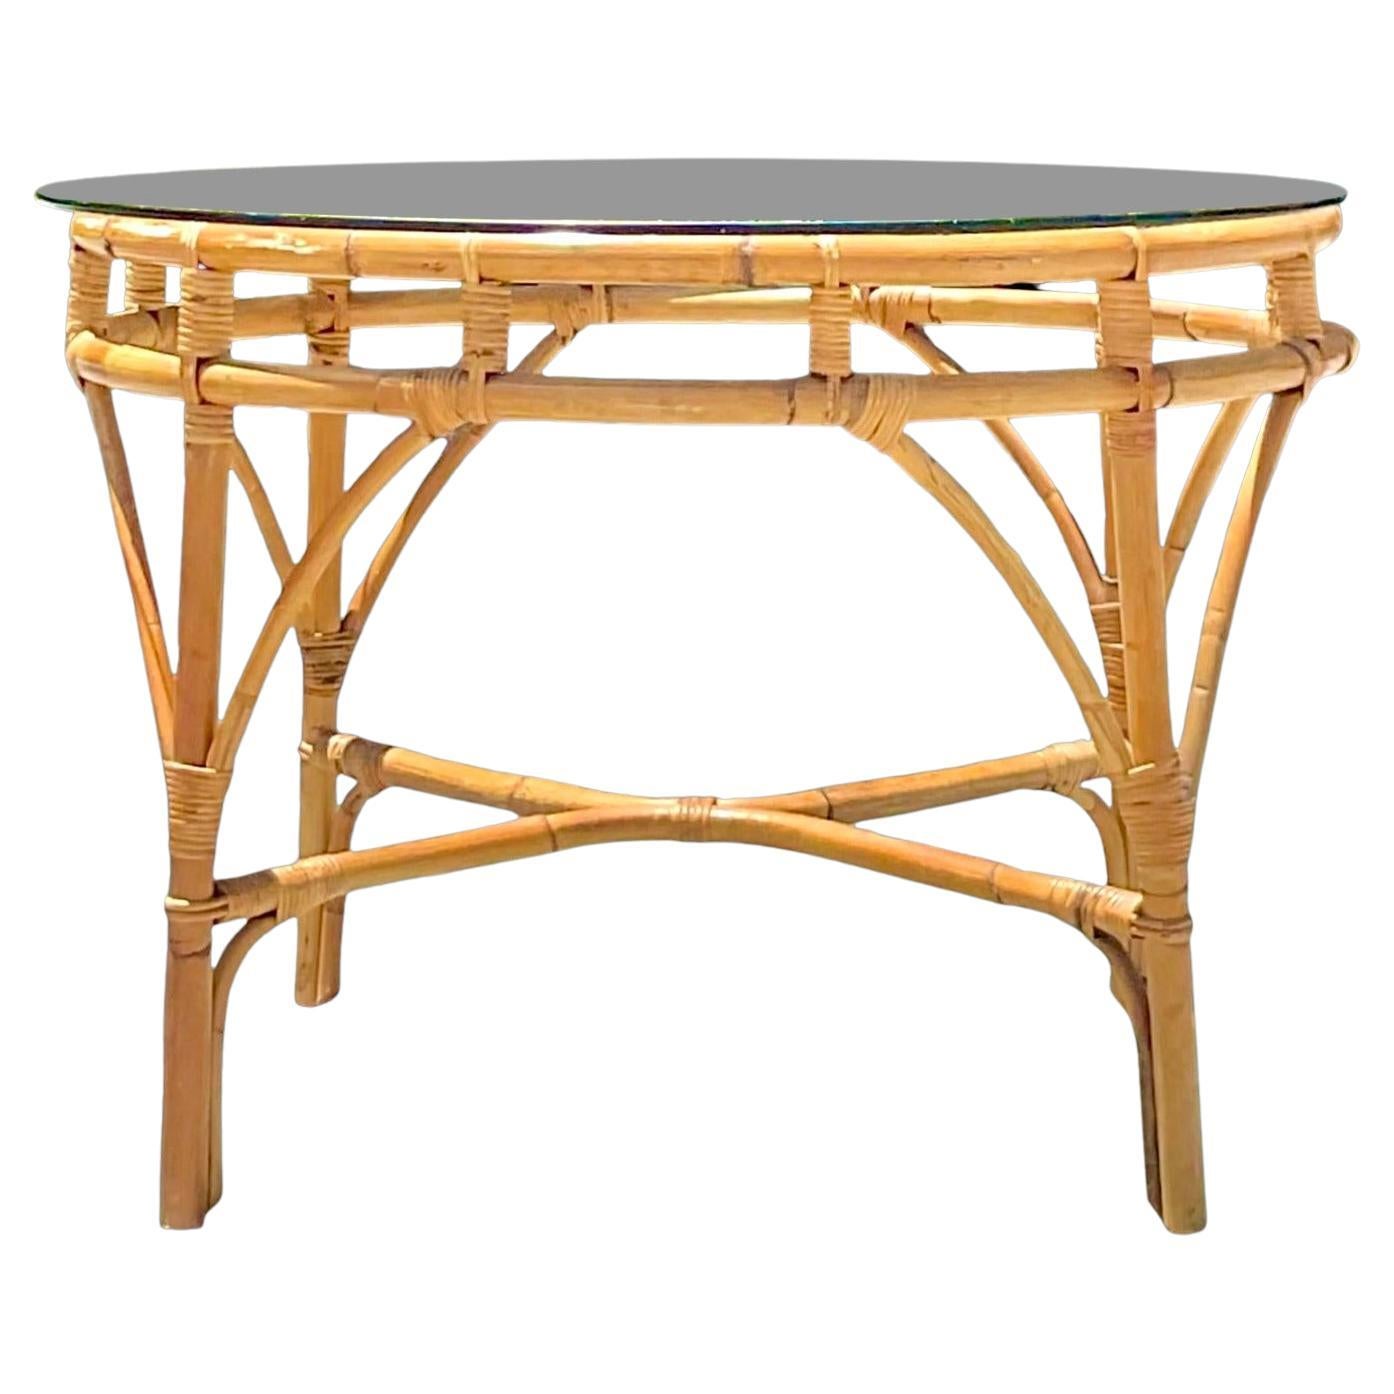 Mid-20th Century Vintage Coastal Bent Rattan Round Dining Table For Sale